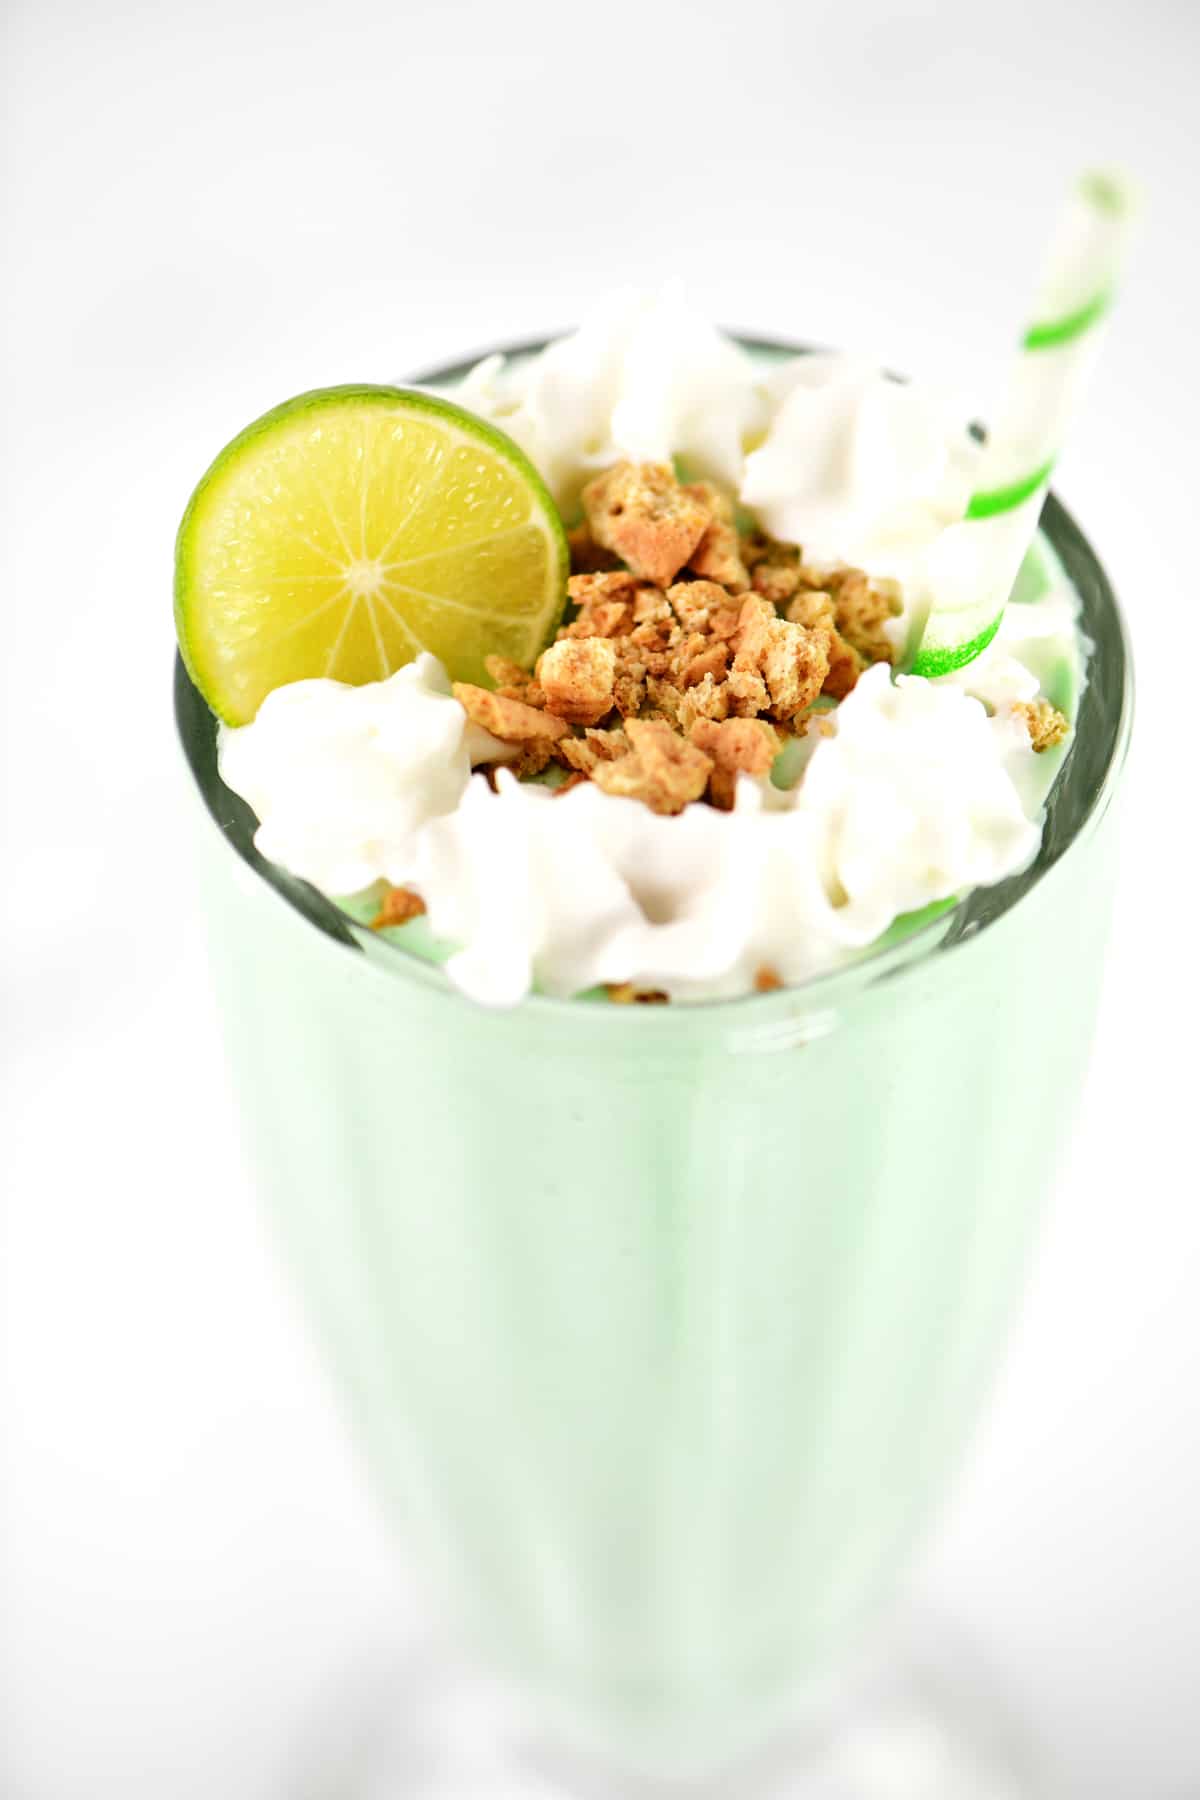 A lime, graham cracker crumbles and whipped cream on top of a key lime milkshake.